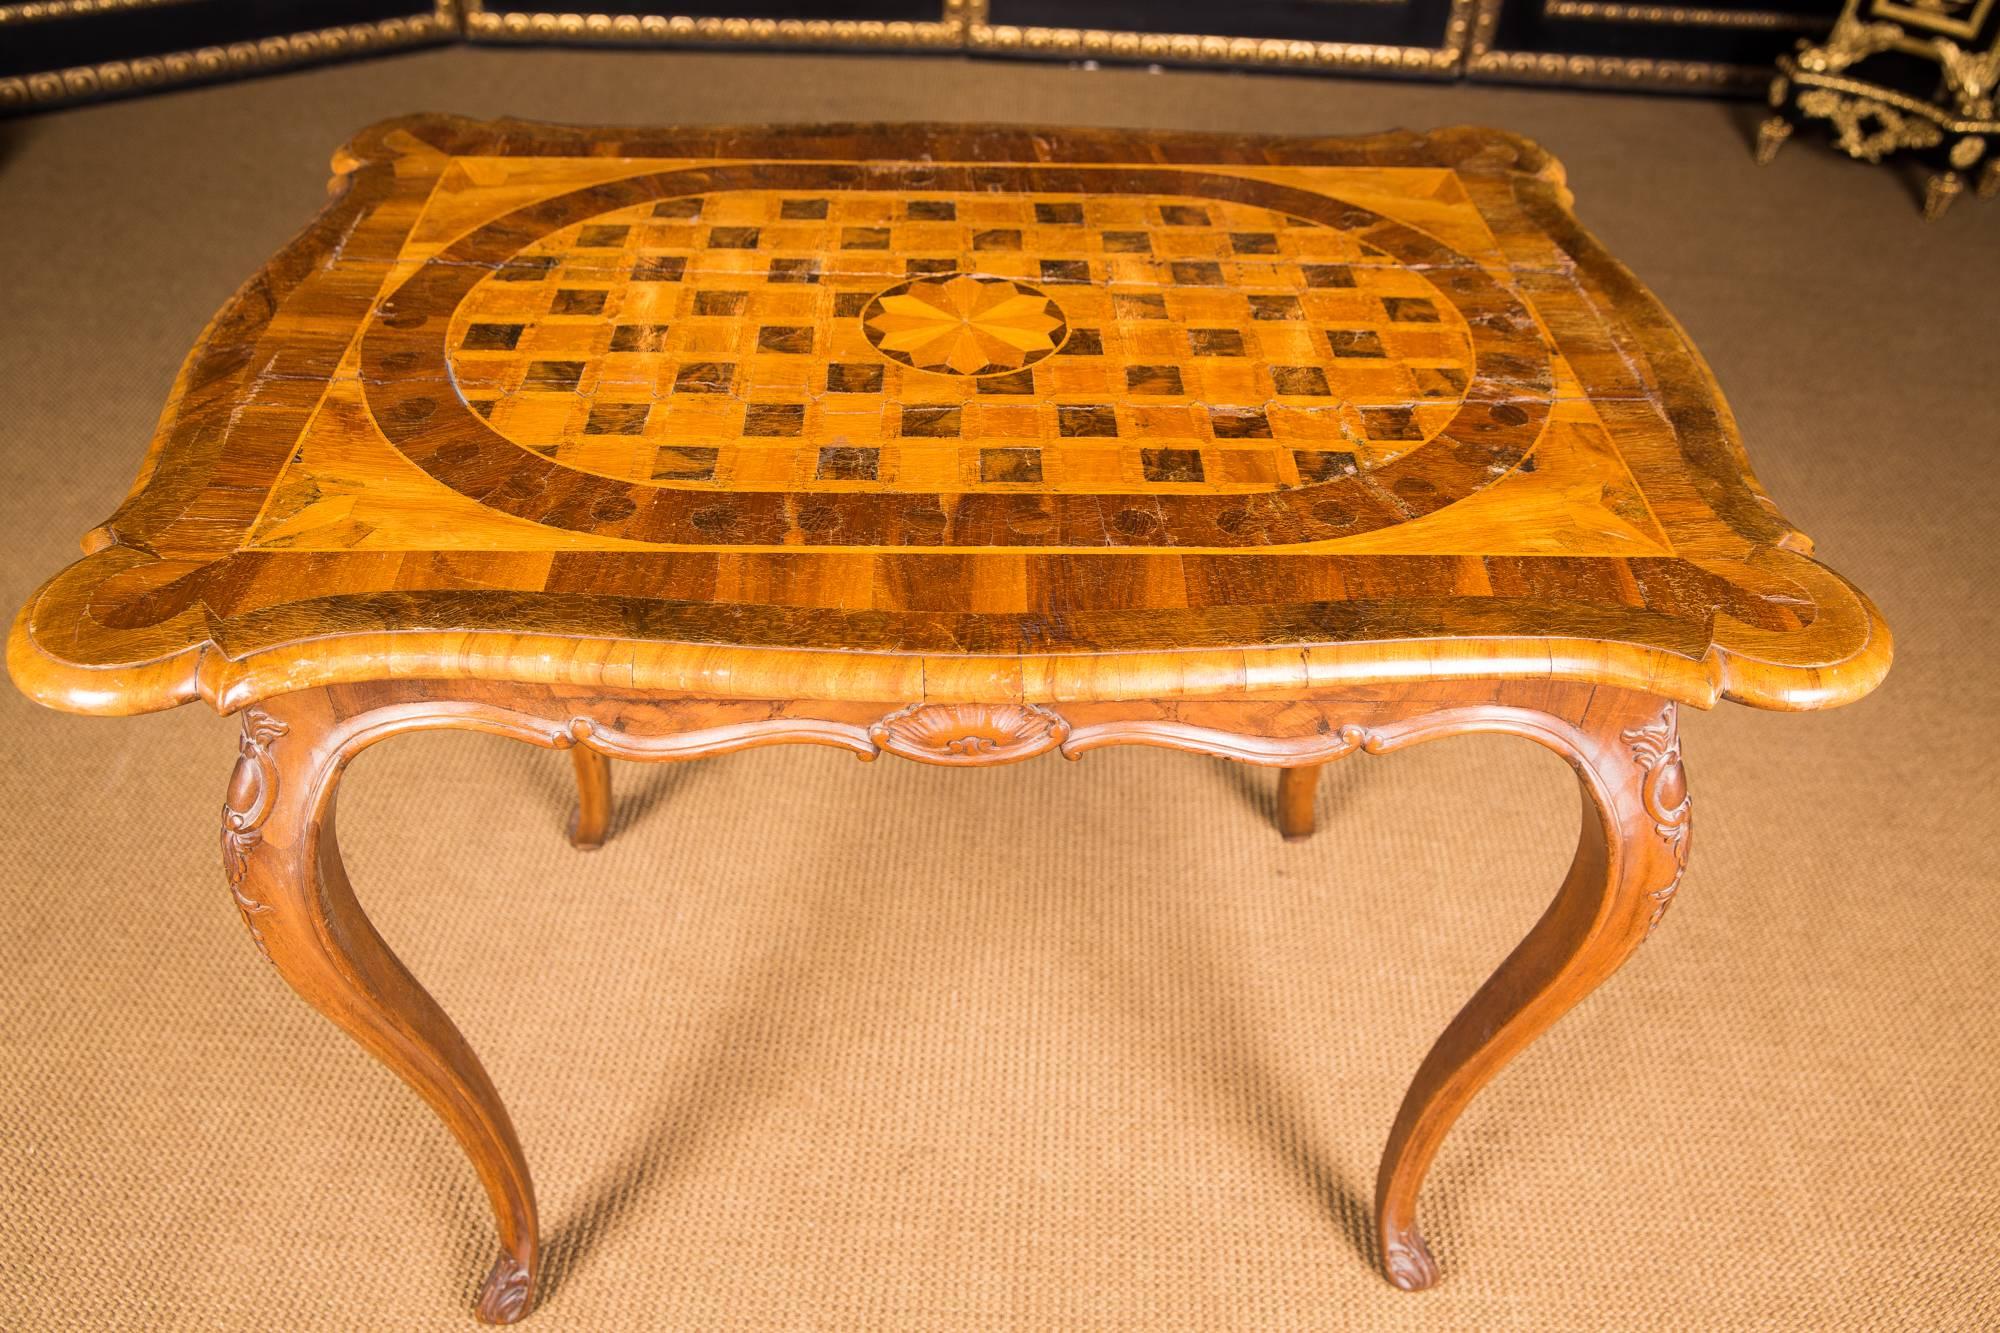 French 18th Century, Original Antique Baroque Table with Inlaid from Solid Walnut